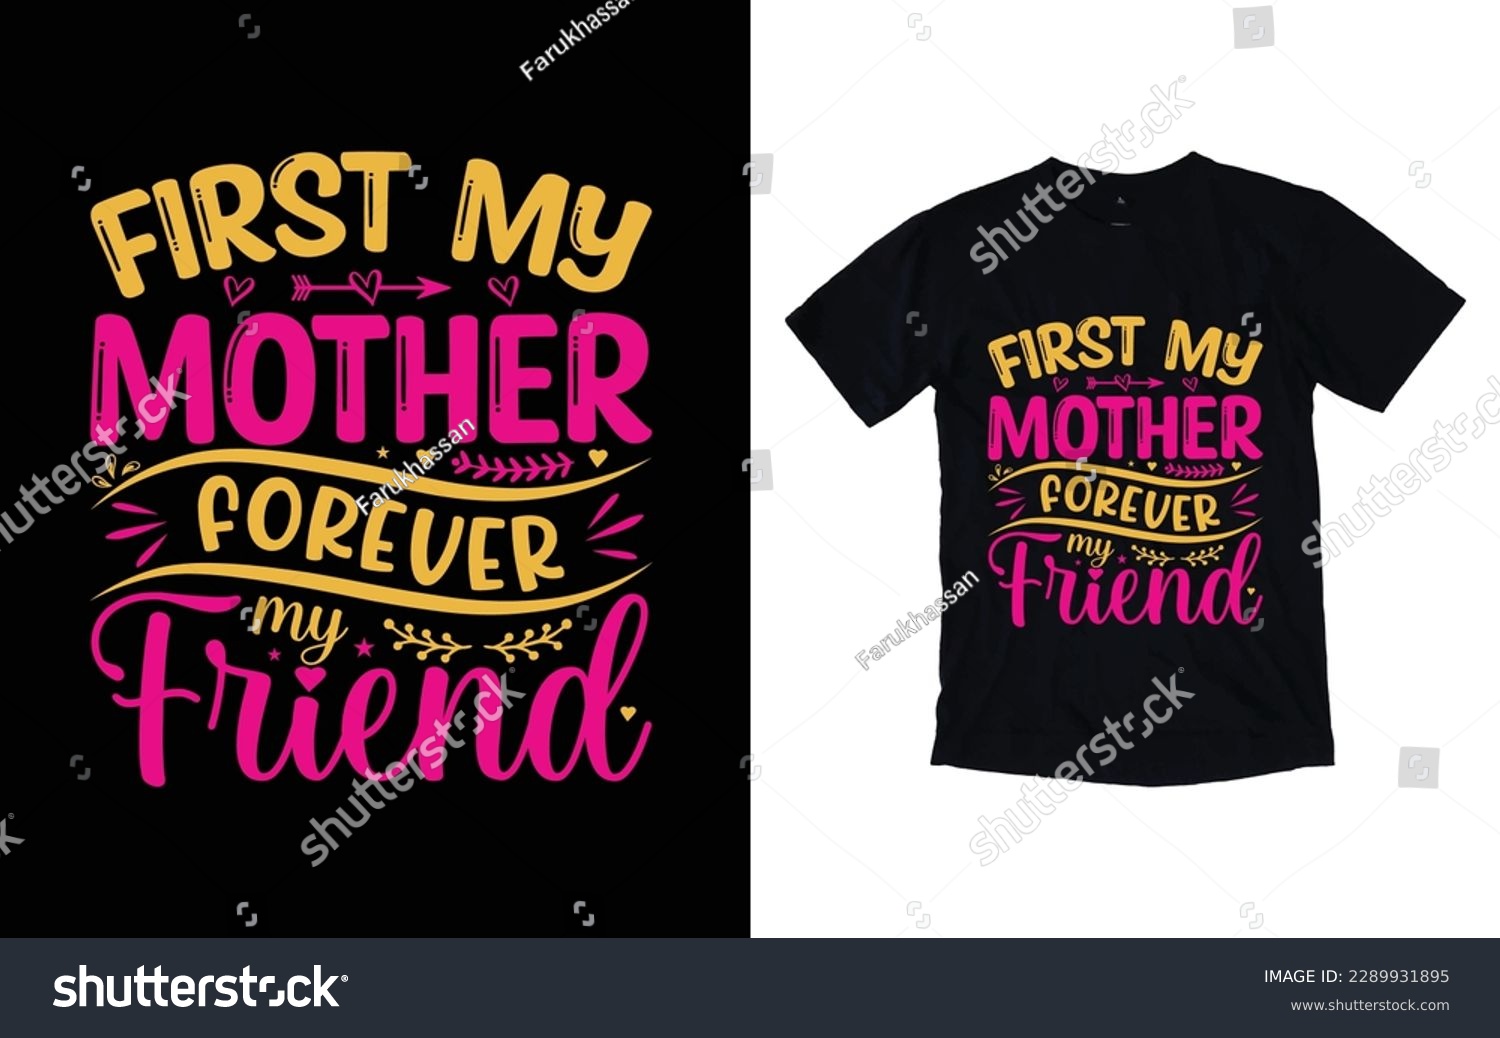 SVG of First my mother forever my friend quote mother's day typography t-shirt design,  Mother's day t-shirt design, Mom t-shirt design svg